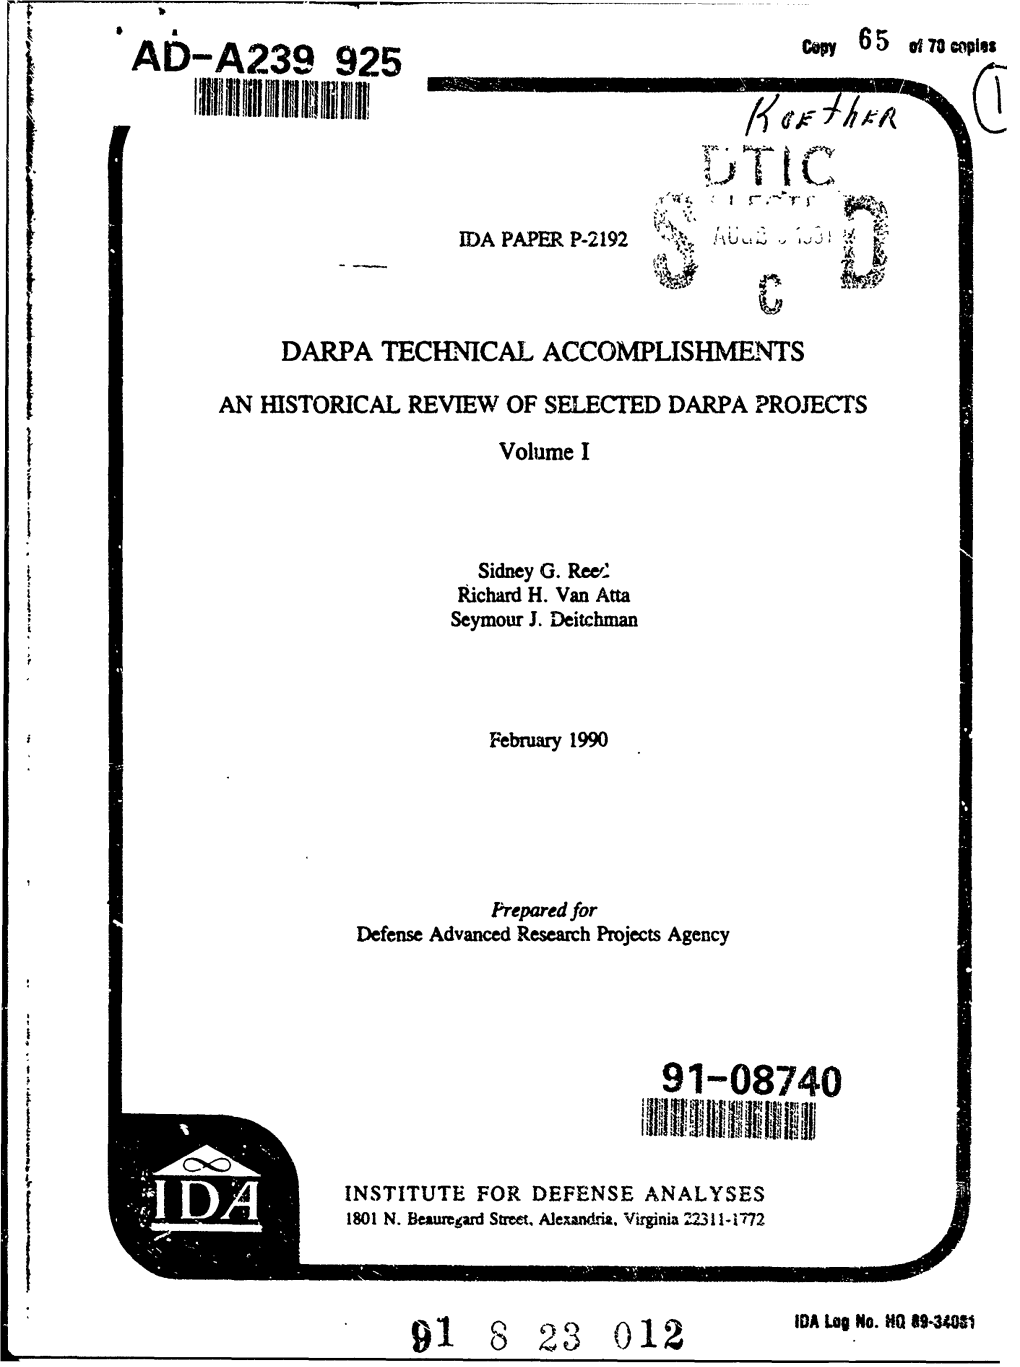 DARPA Technical Accomplishments. an Historical Review of Selected